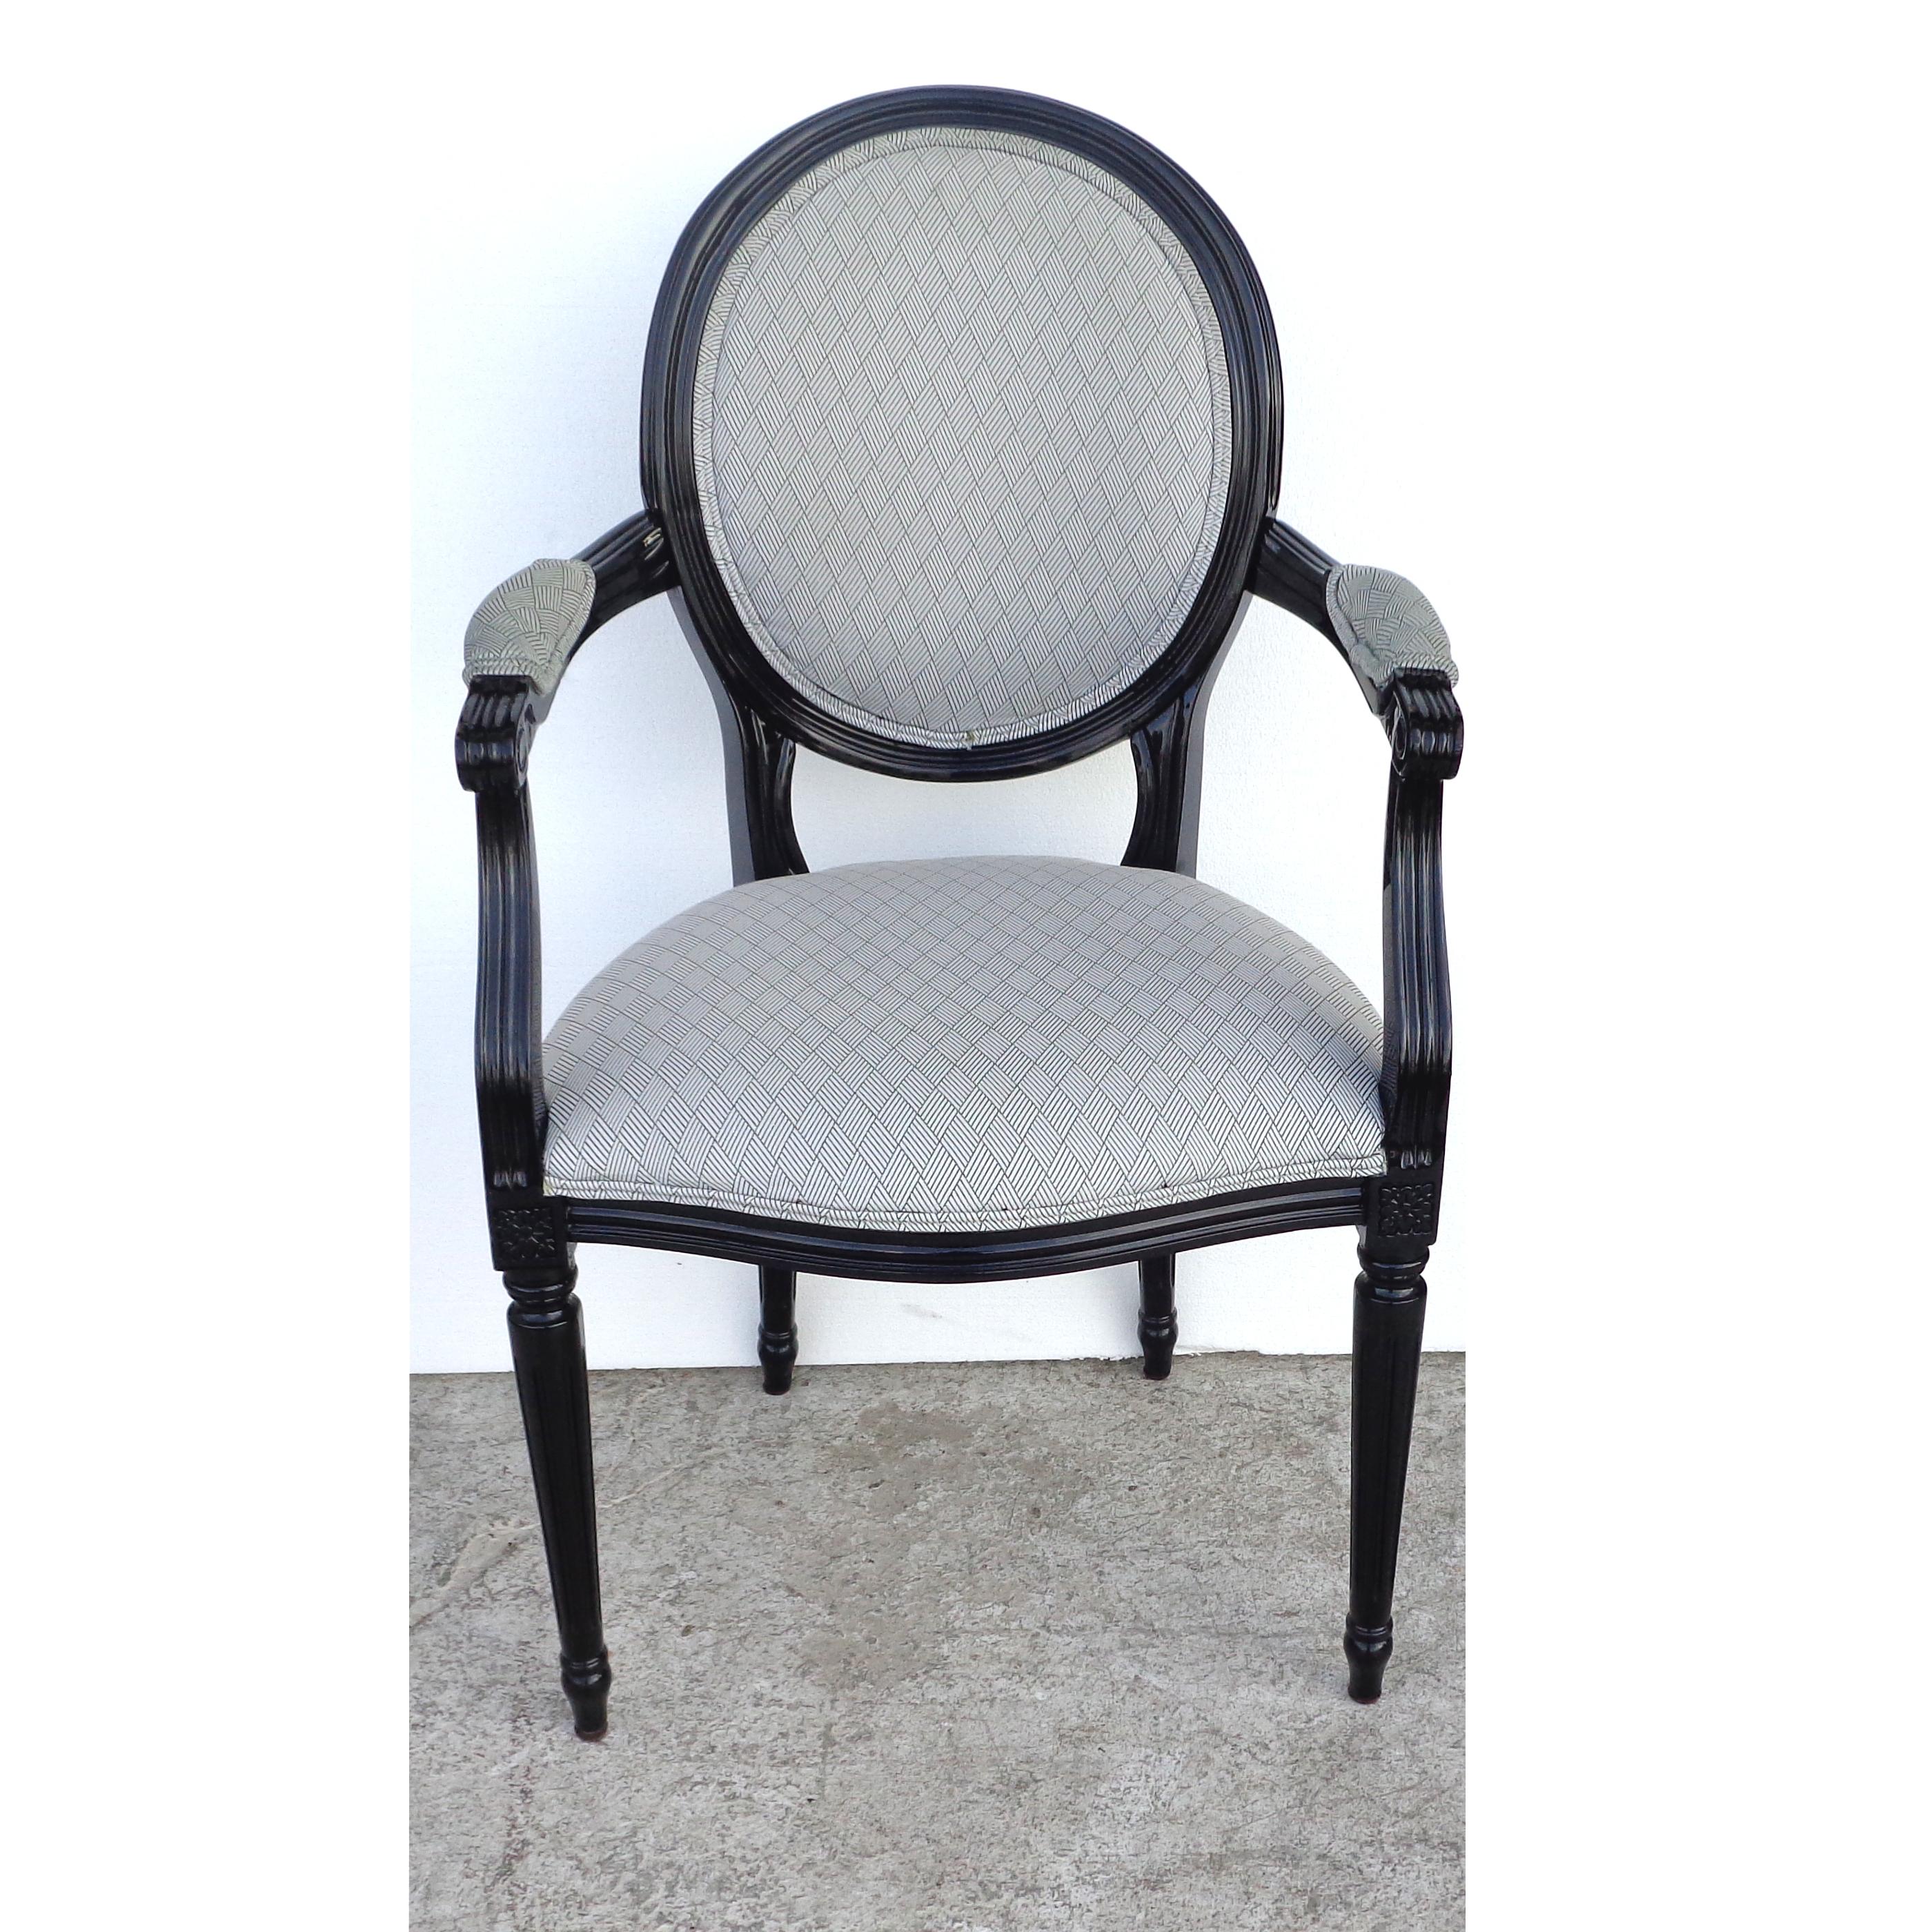 Neoclassical Louis XVI style dining chairs

Set of 10 Directoire-style dining chairs. Ebonized frames with rounded oval backs. Both sides and seats are upholstered in a rich grey diamond patterned fabric. French style base with column-like legs